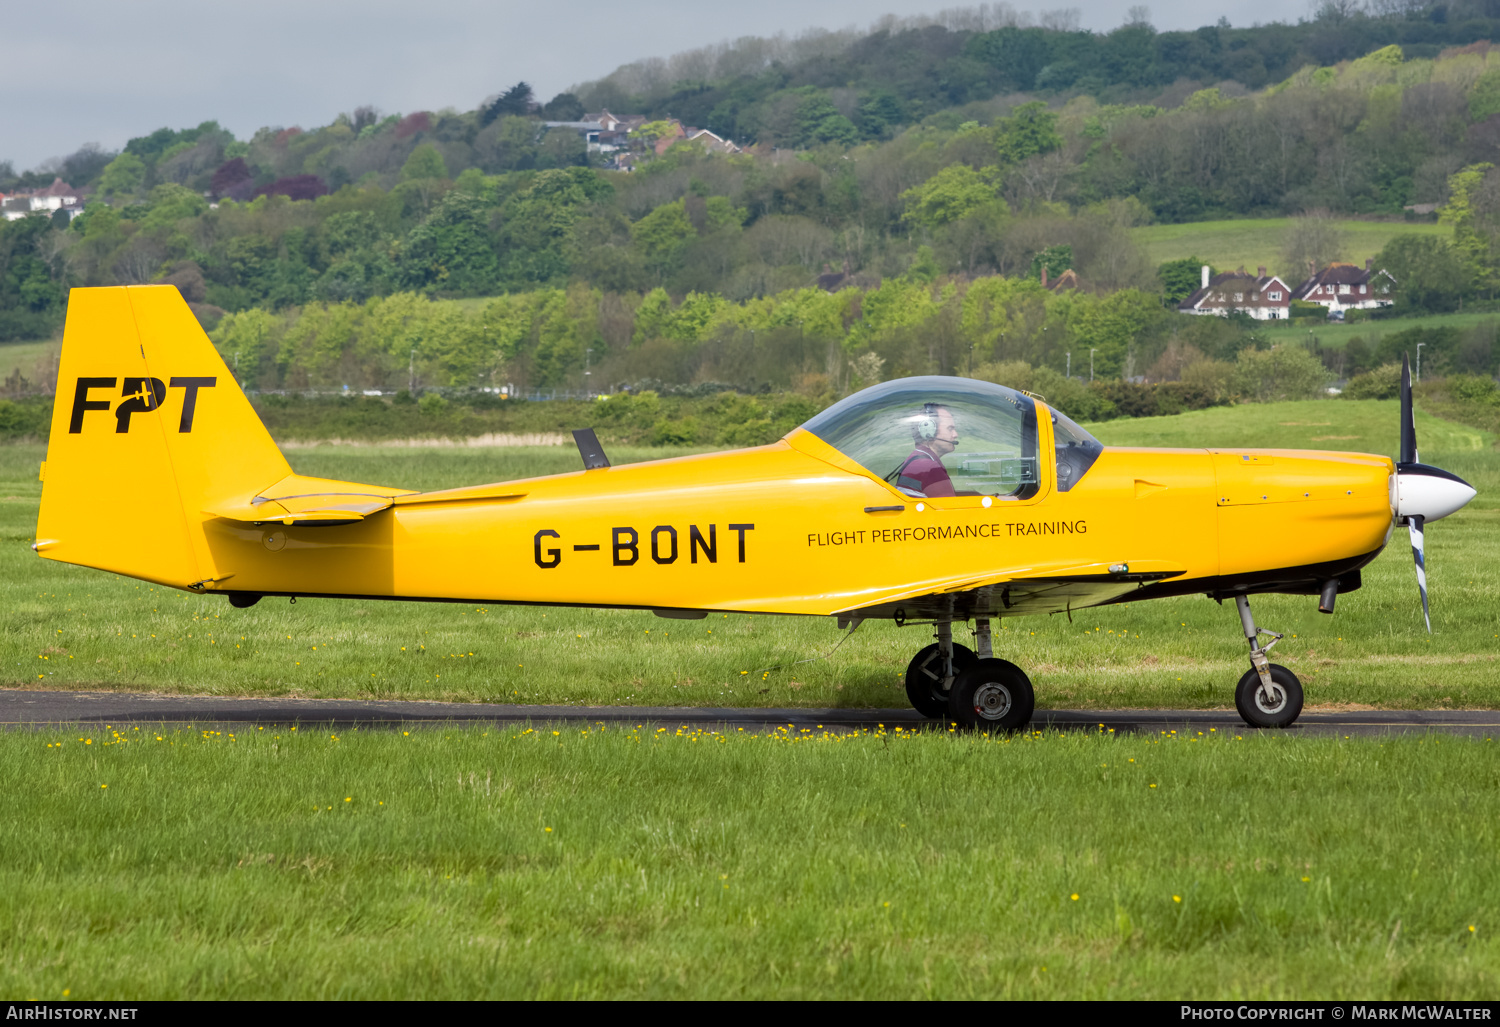 Aircraft Photo of G-BONT | Slingsby T-67M Firefly Mk2 | Flight Performance Training - FPT | AirHistory.net #687132